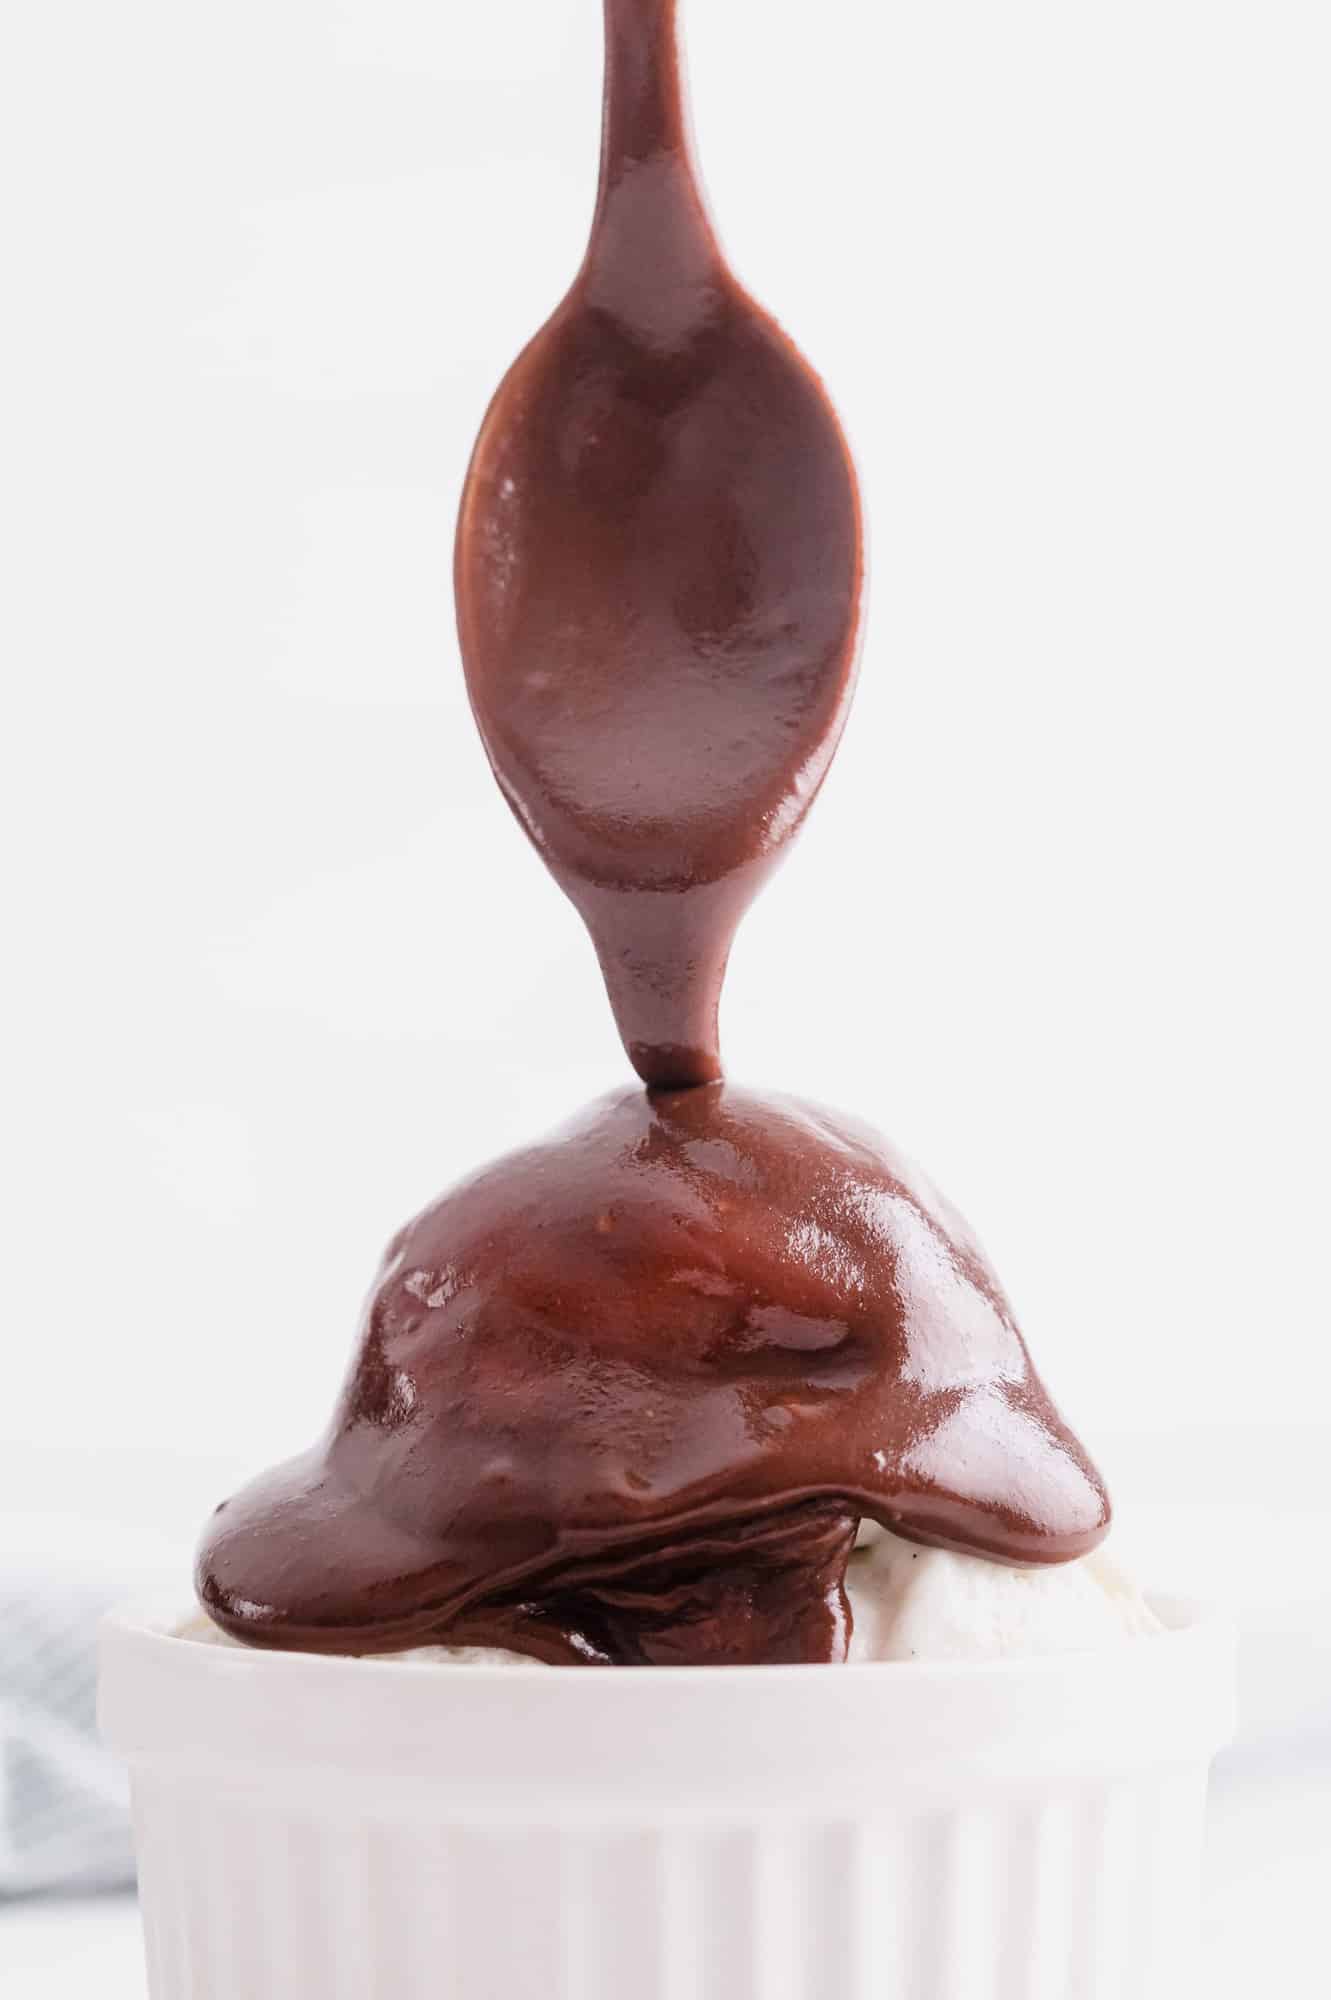 Chocolate sauce being poured on ice cream.